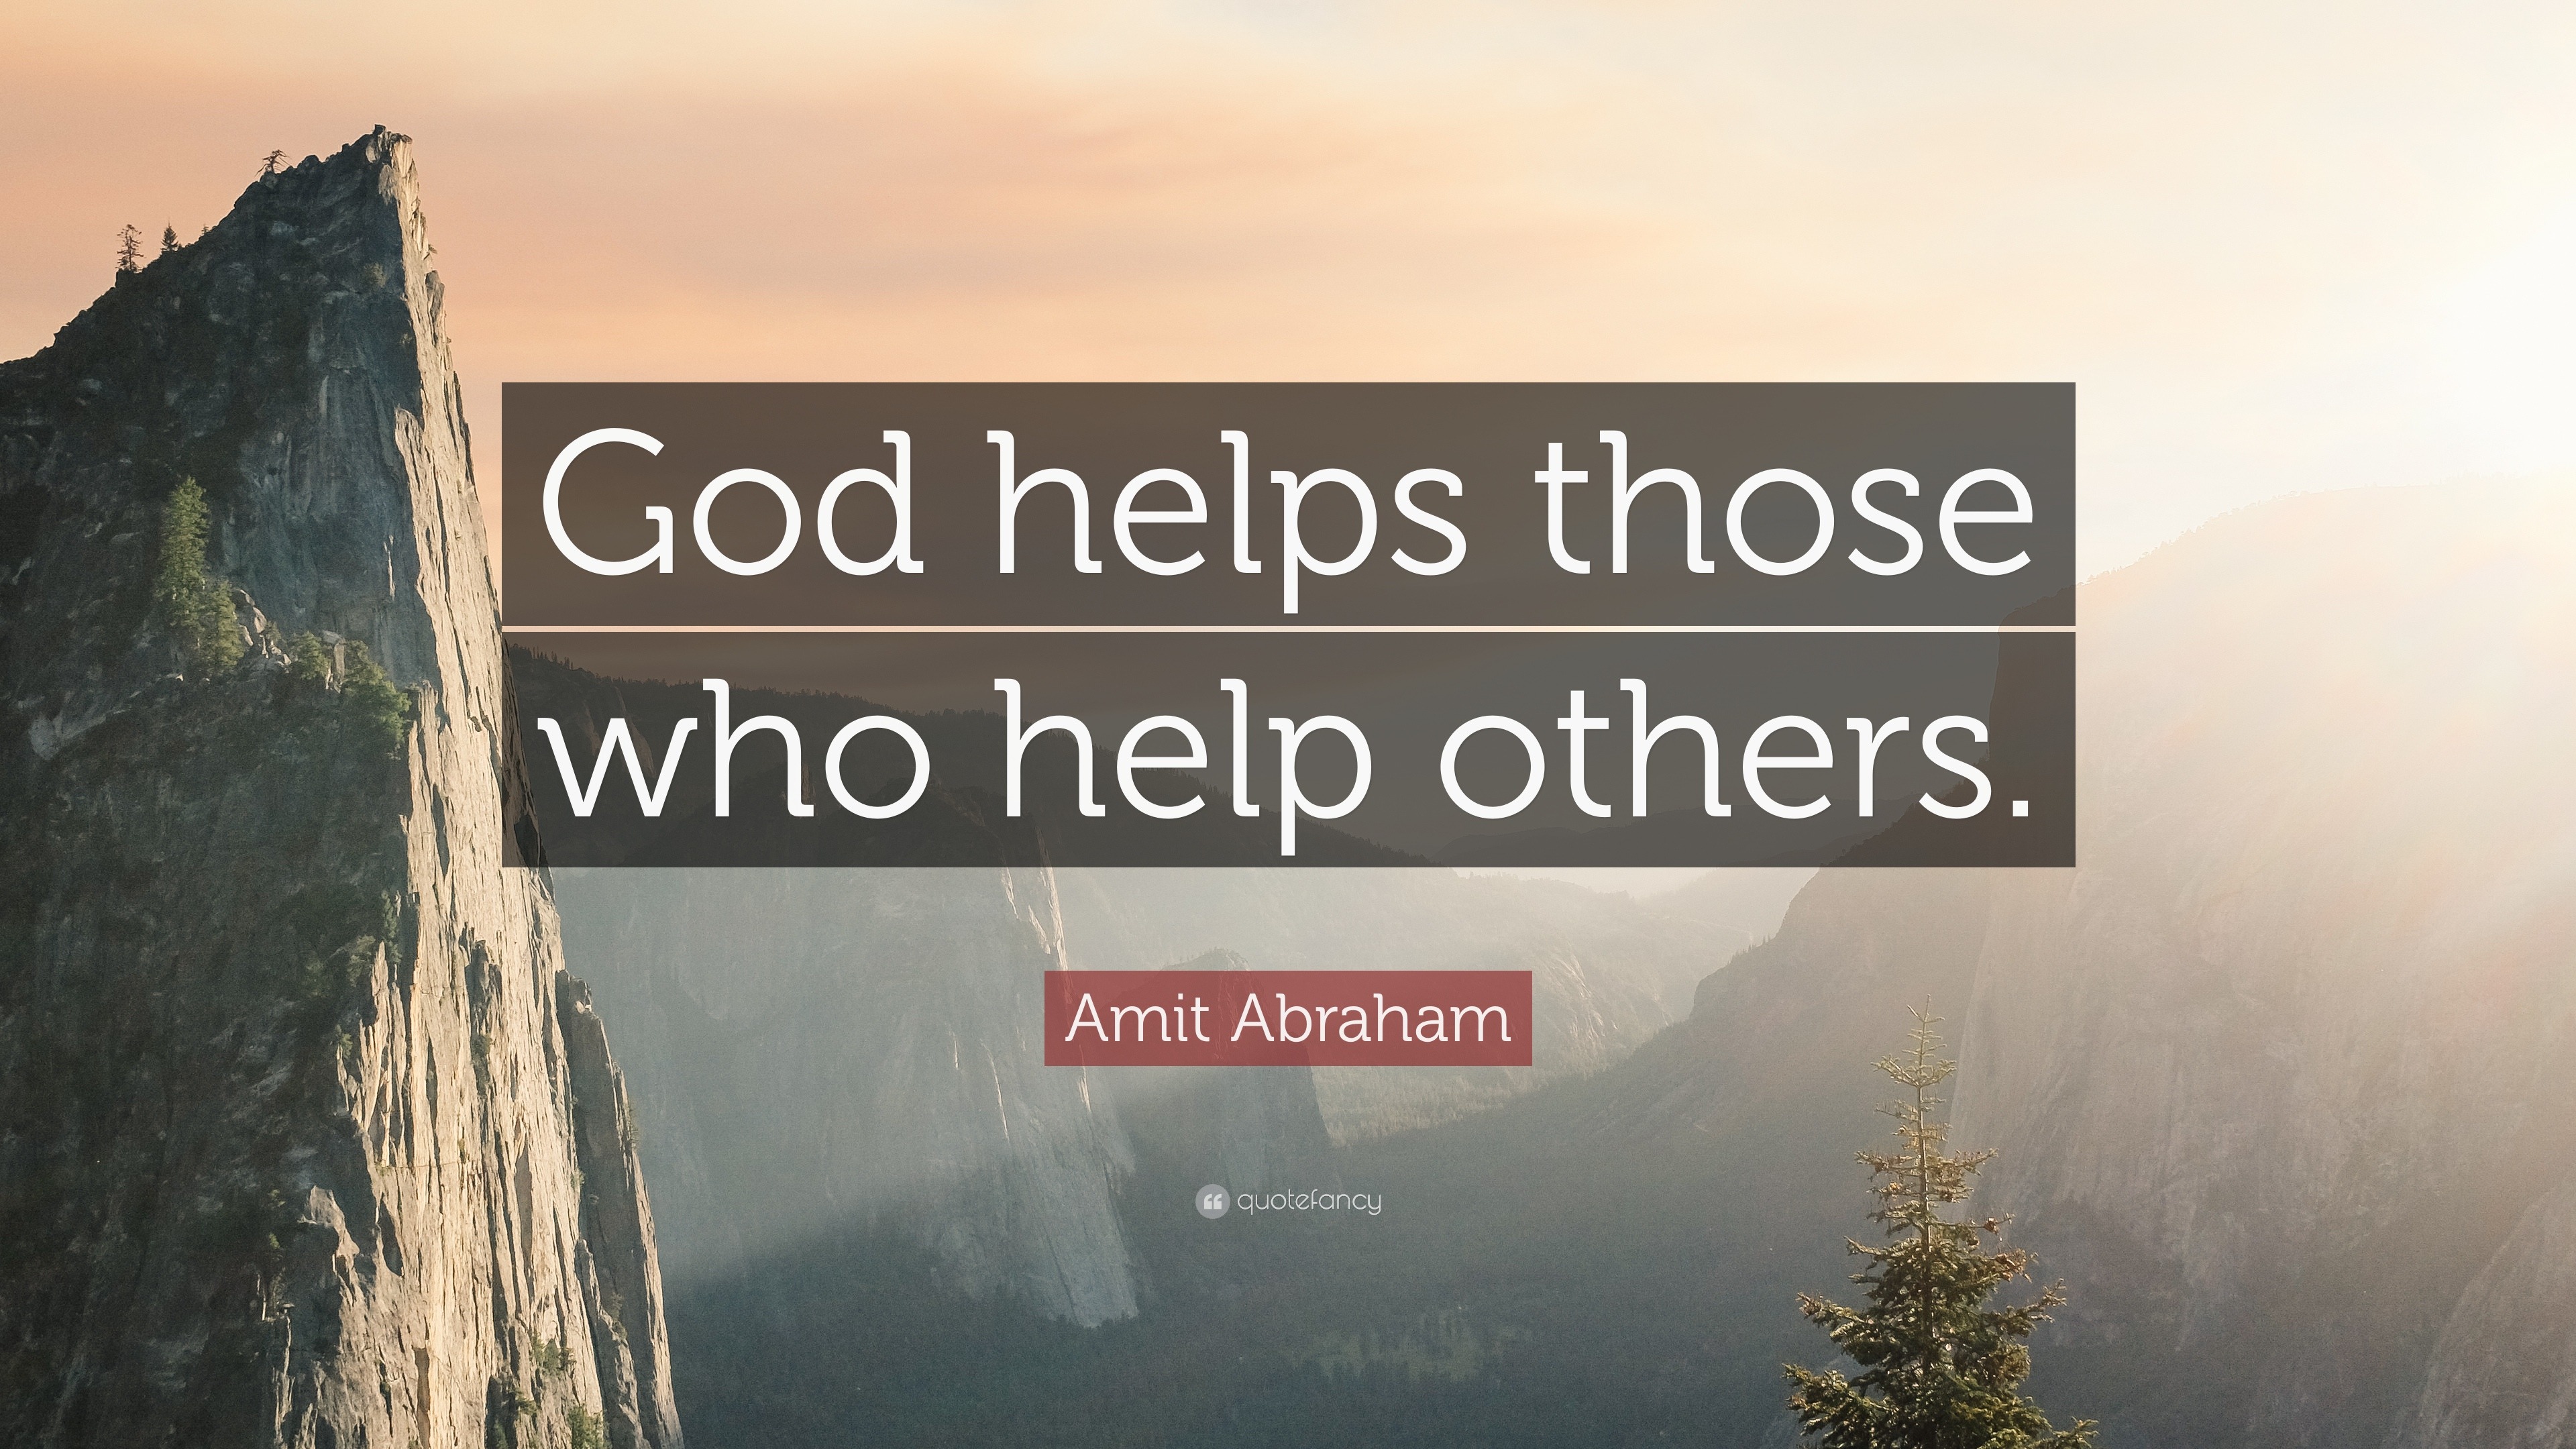 Amit Abraham Quote “God helps those who help others.” (12